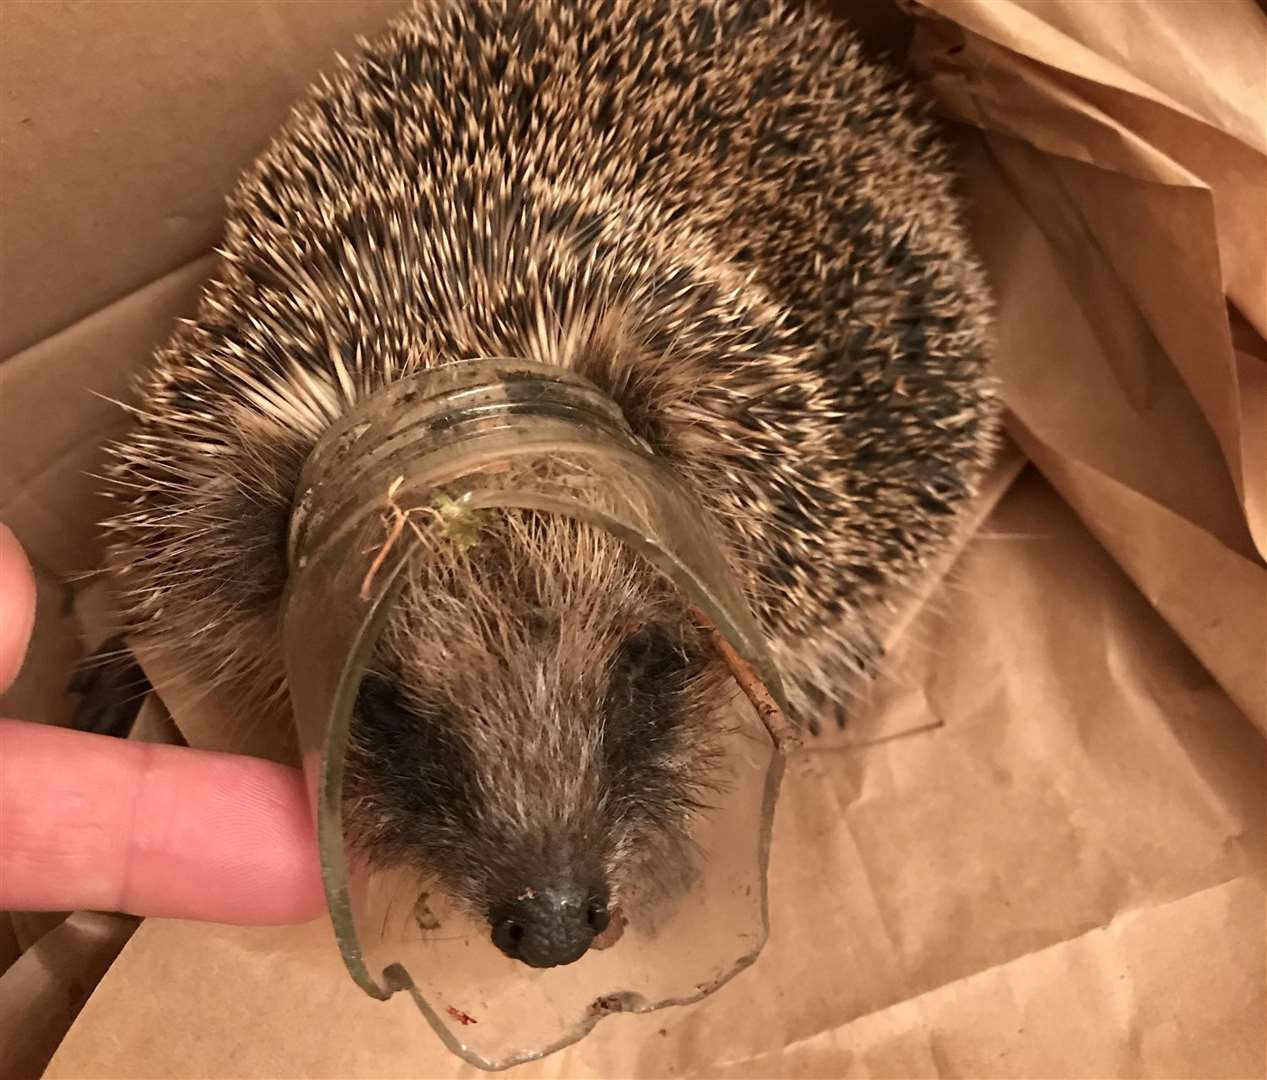 The hedgehog was rescued by a member of the public (5323230)